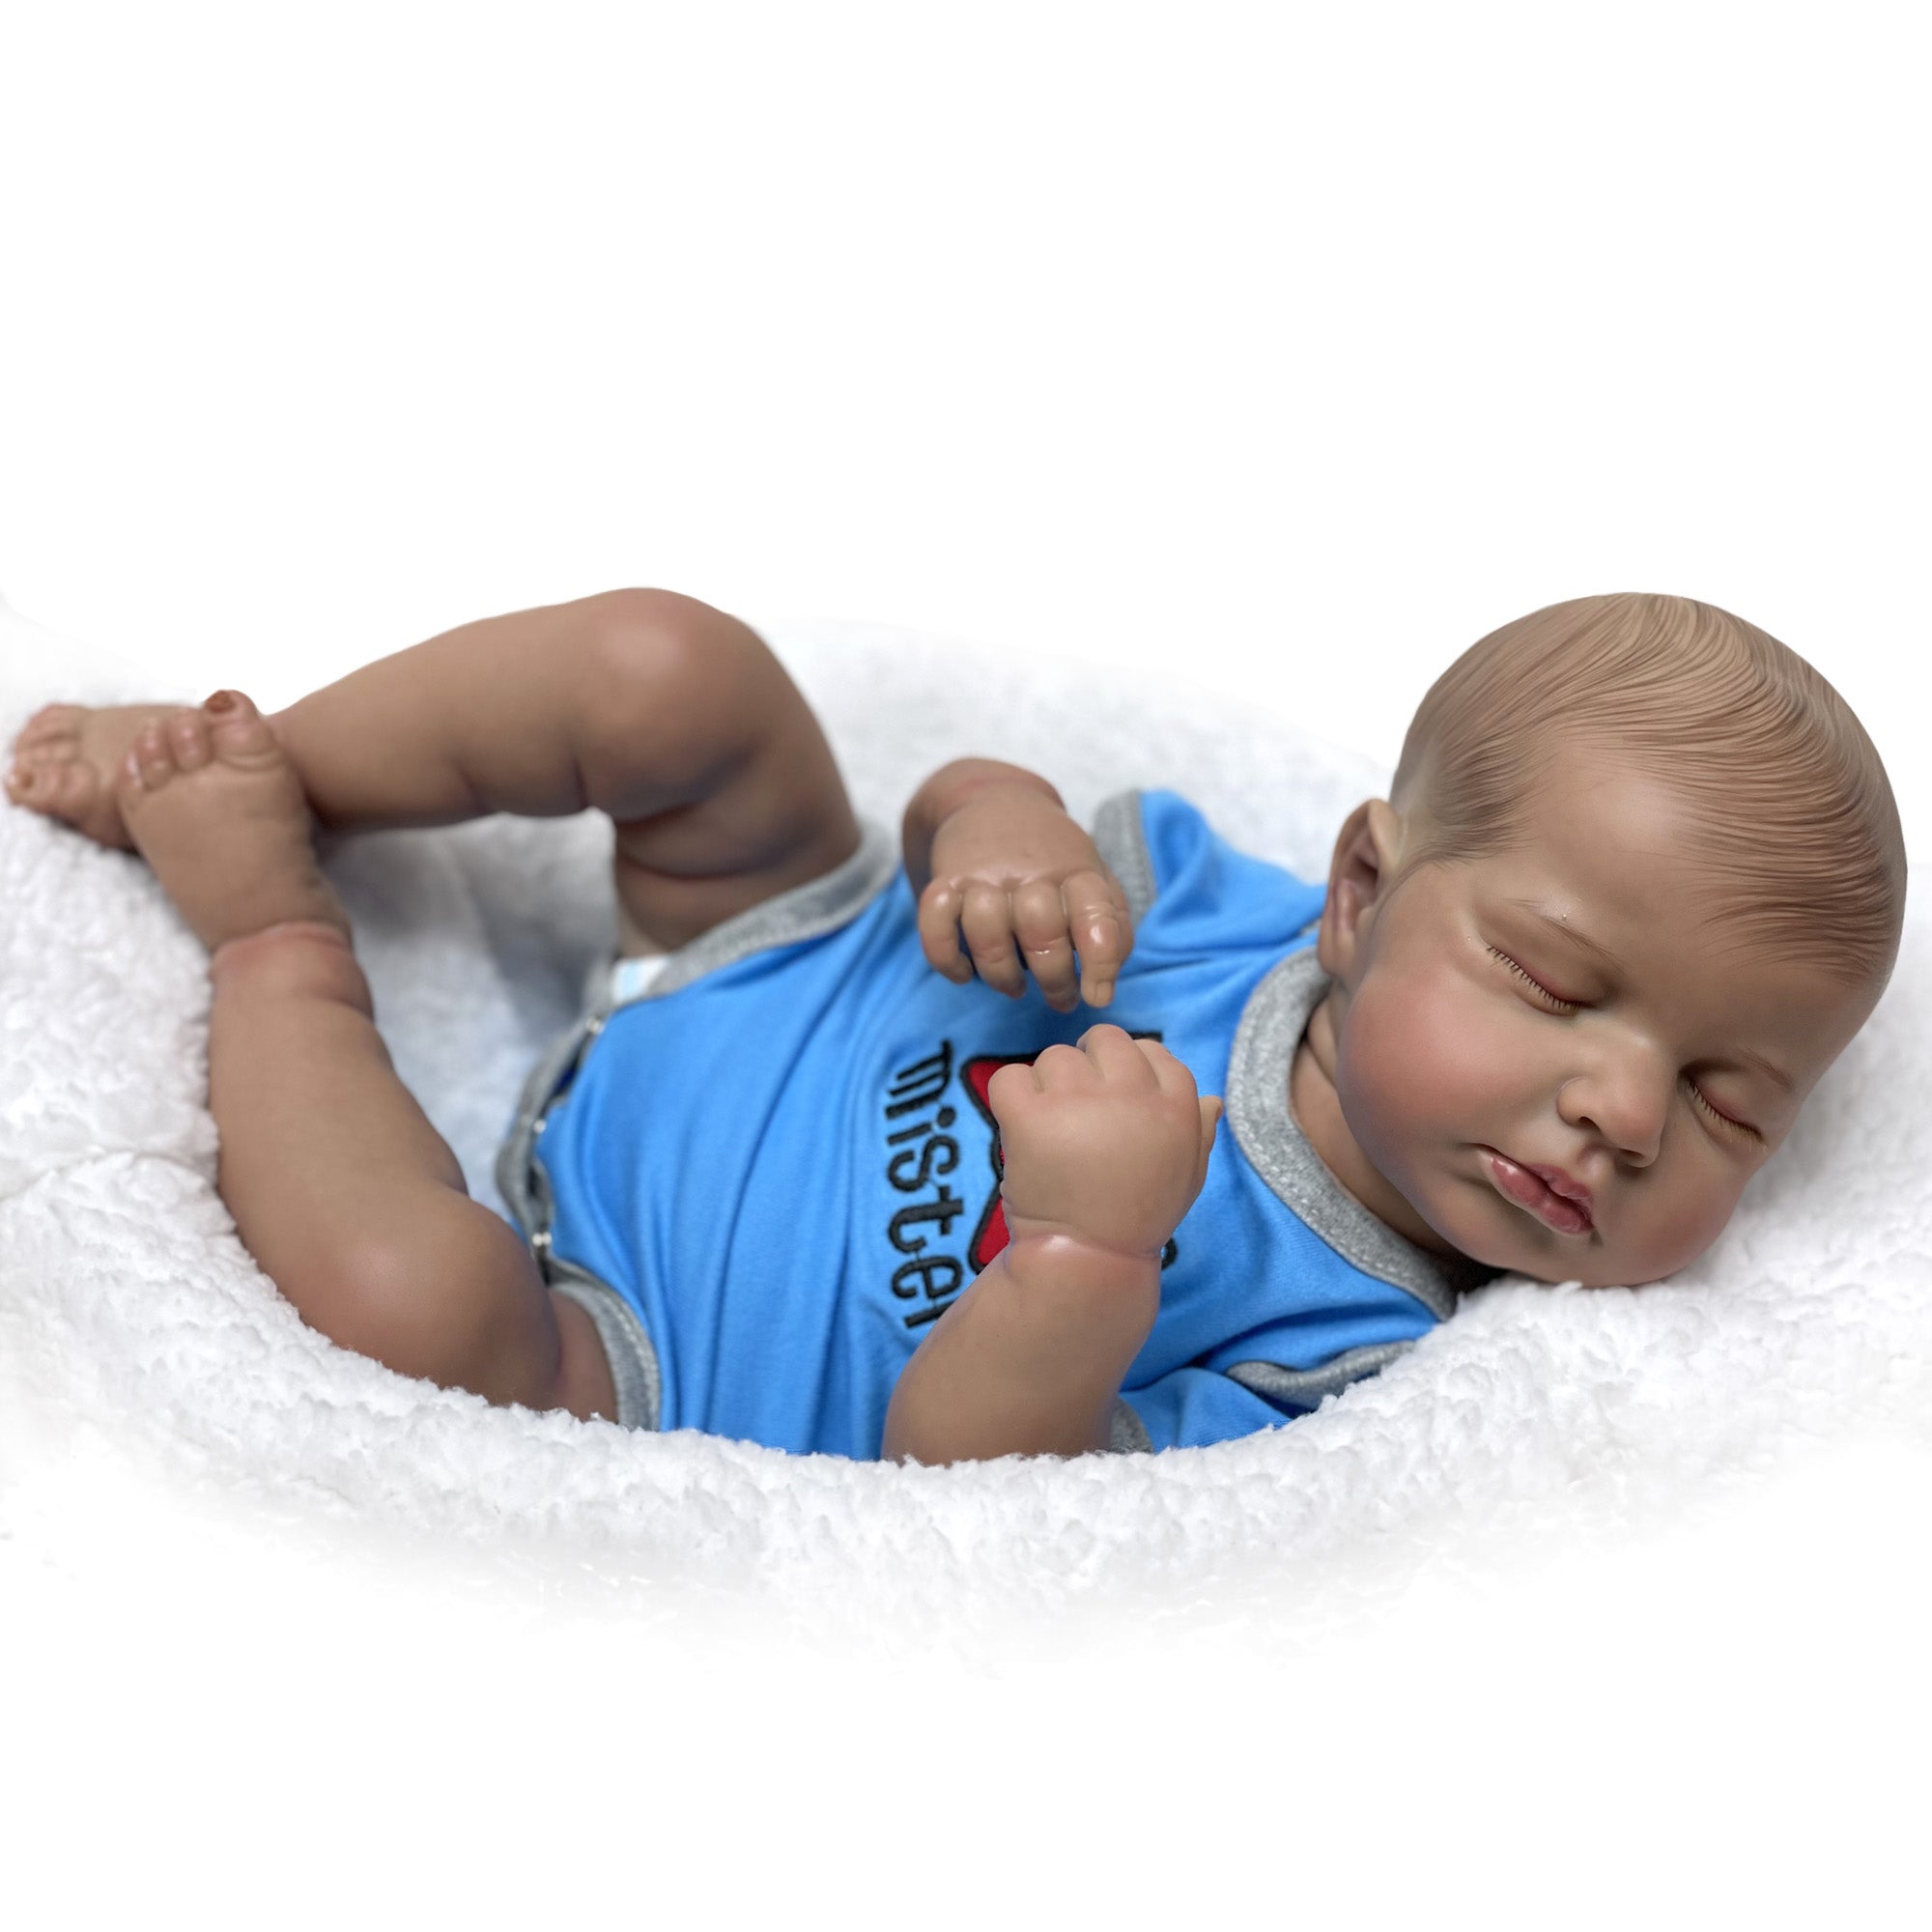 Adolly Gallery 20 Inch Lifelike Reborn Baby Doll Soft Silicone Vinyl Reborn  Toddlers Soft Cloth Body Gifts for Newborn Babies Name Eli